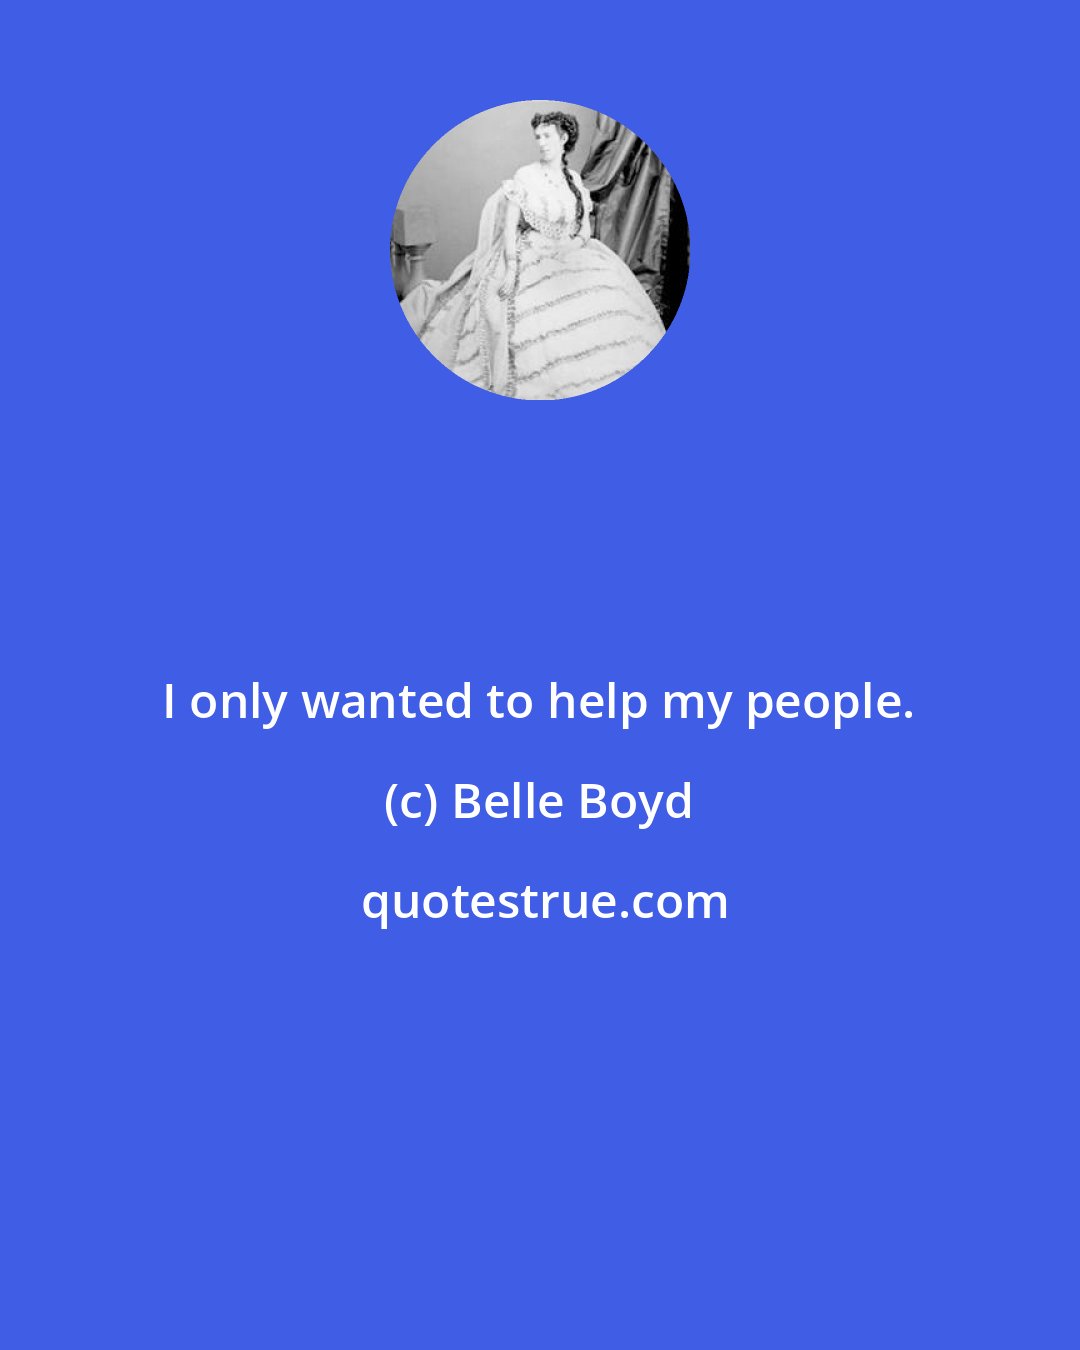 Belle Boyd: I only wanted to help my people.